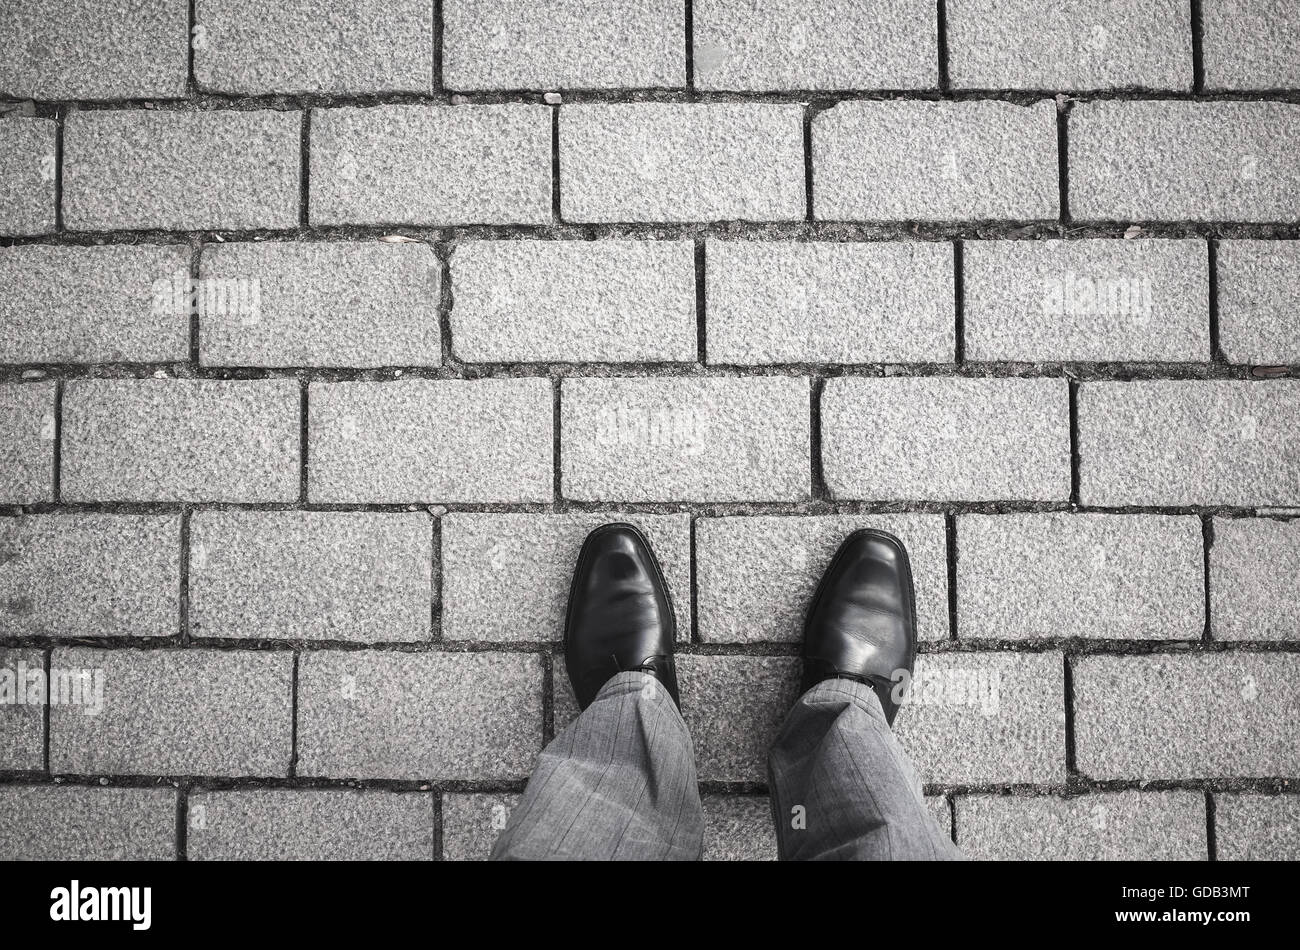 Feet of an urbanite man in black new shining shoes standing on gray cobblestone road Stock Photo